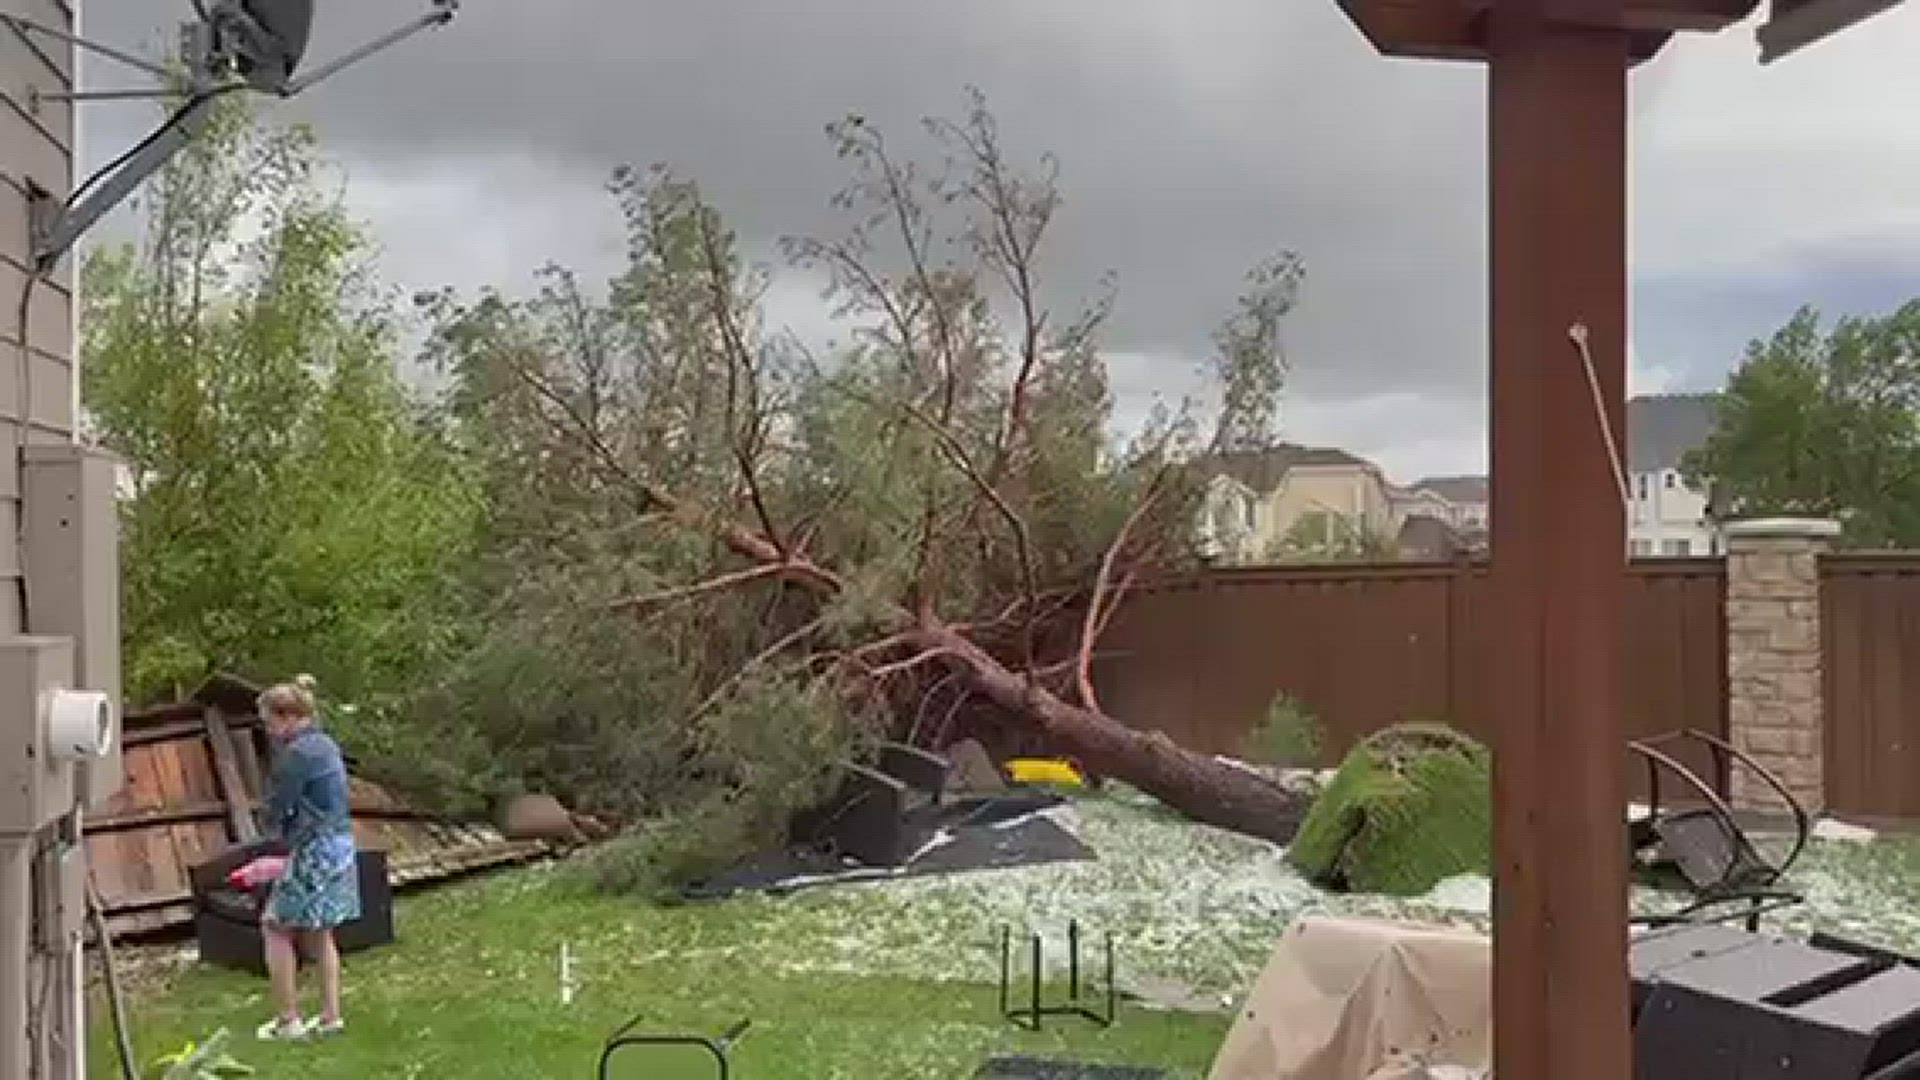 A tornado left an 8-mile trail of damage through suburban Highlands Ranch. Now comes the clean-up.